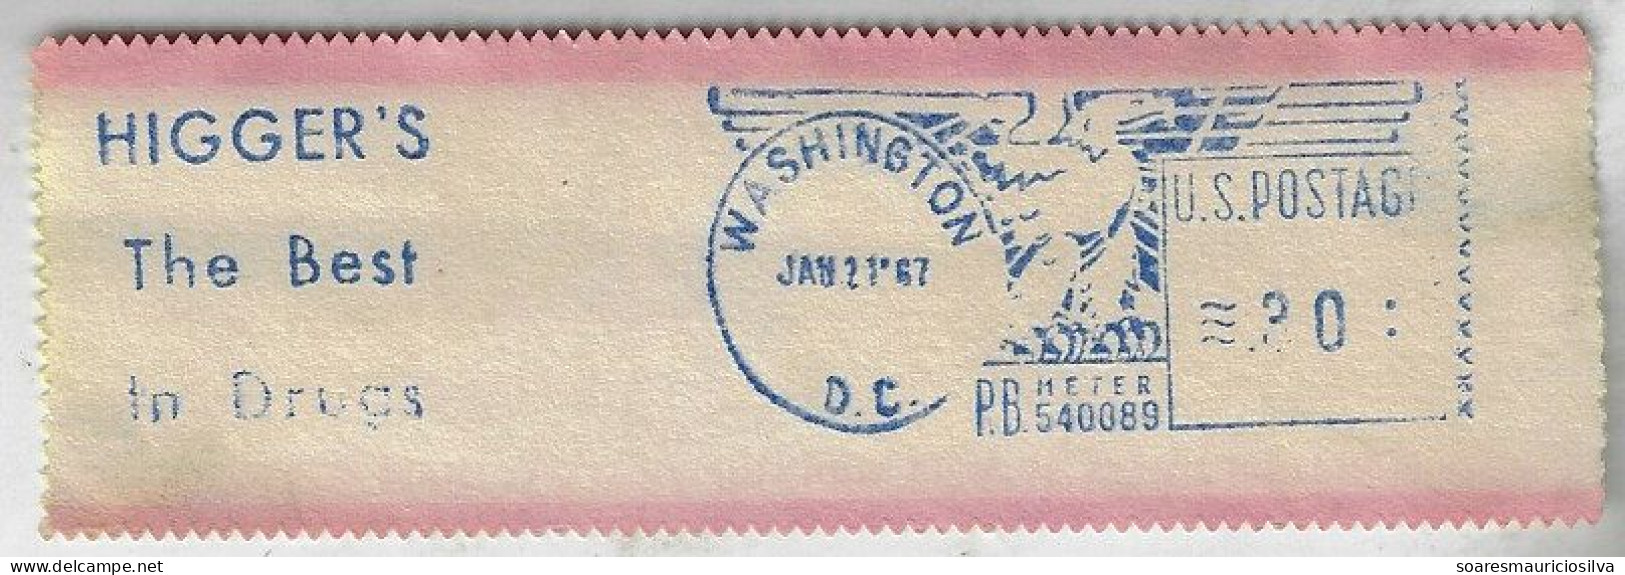 USA 1967 Label With Meter Stamp Pitney Bowes Slogan Higger's The Best In Drugs From Washington 30 Cents - Droga